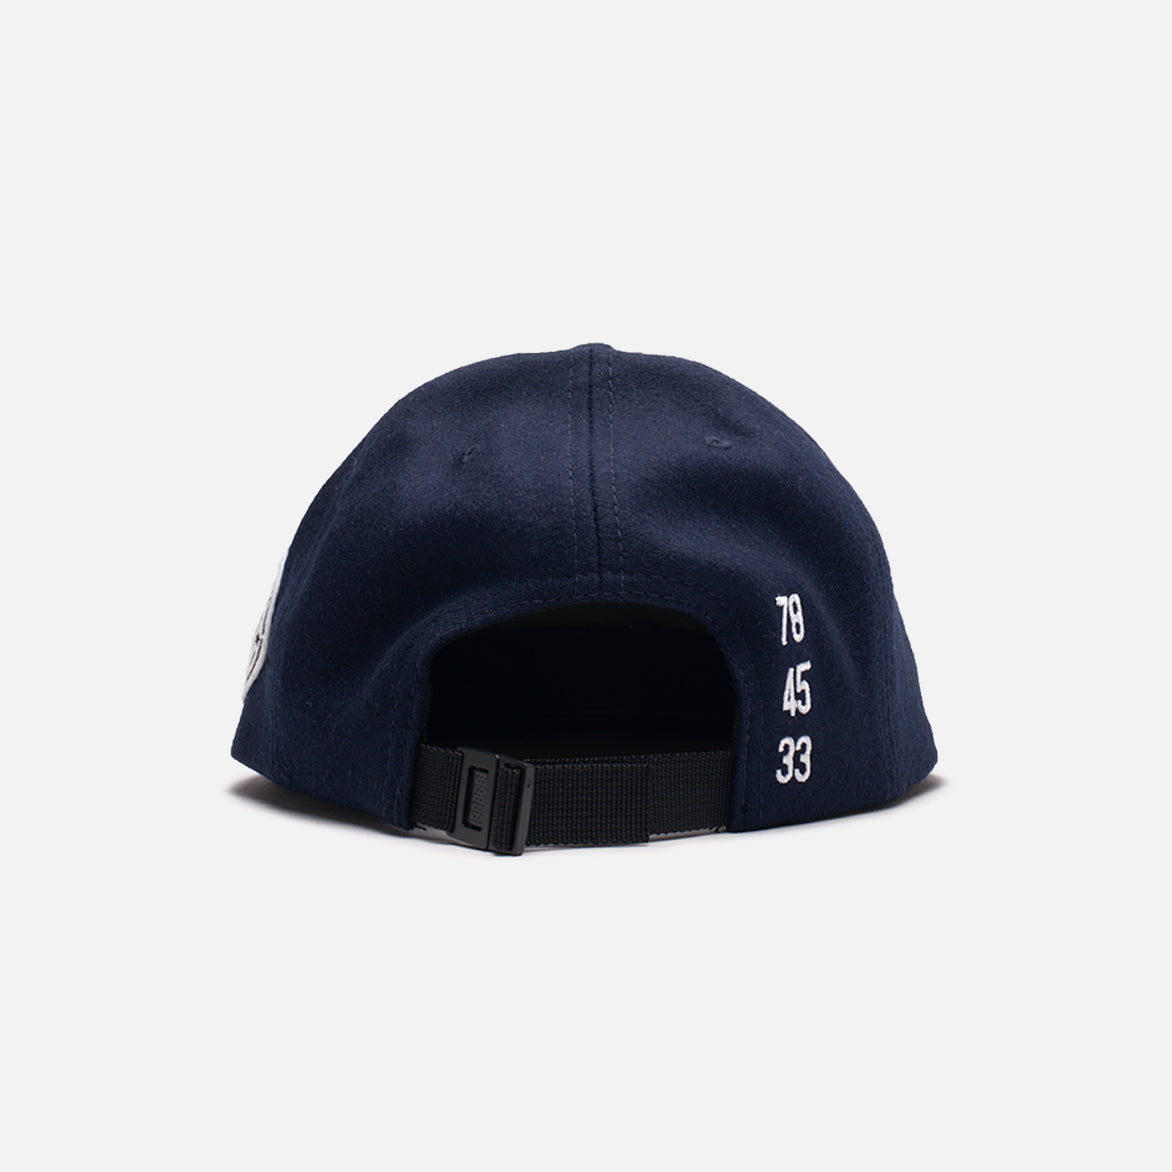 NEW YORK CRATE DIGGERS STRAPBACK HAT - NAVY